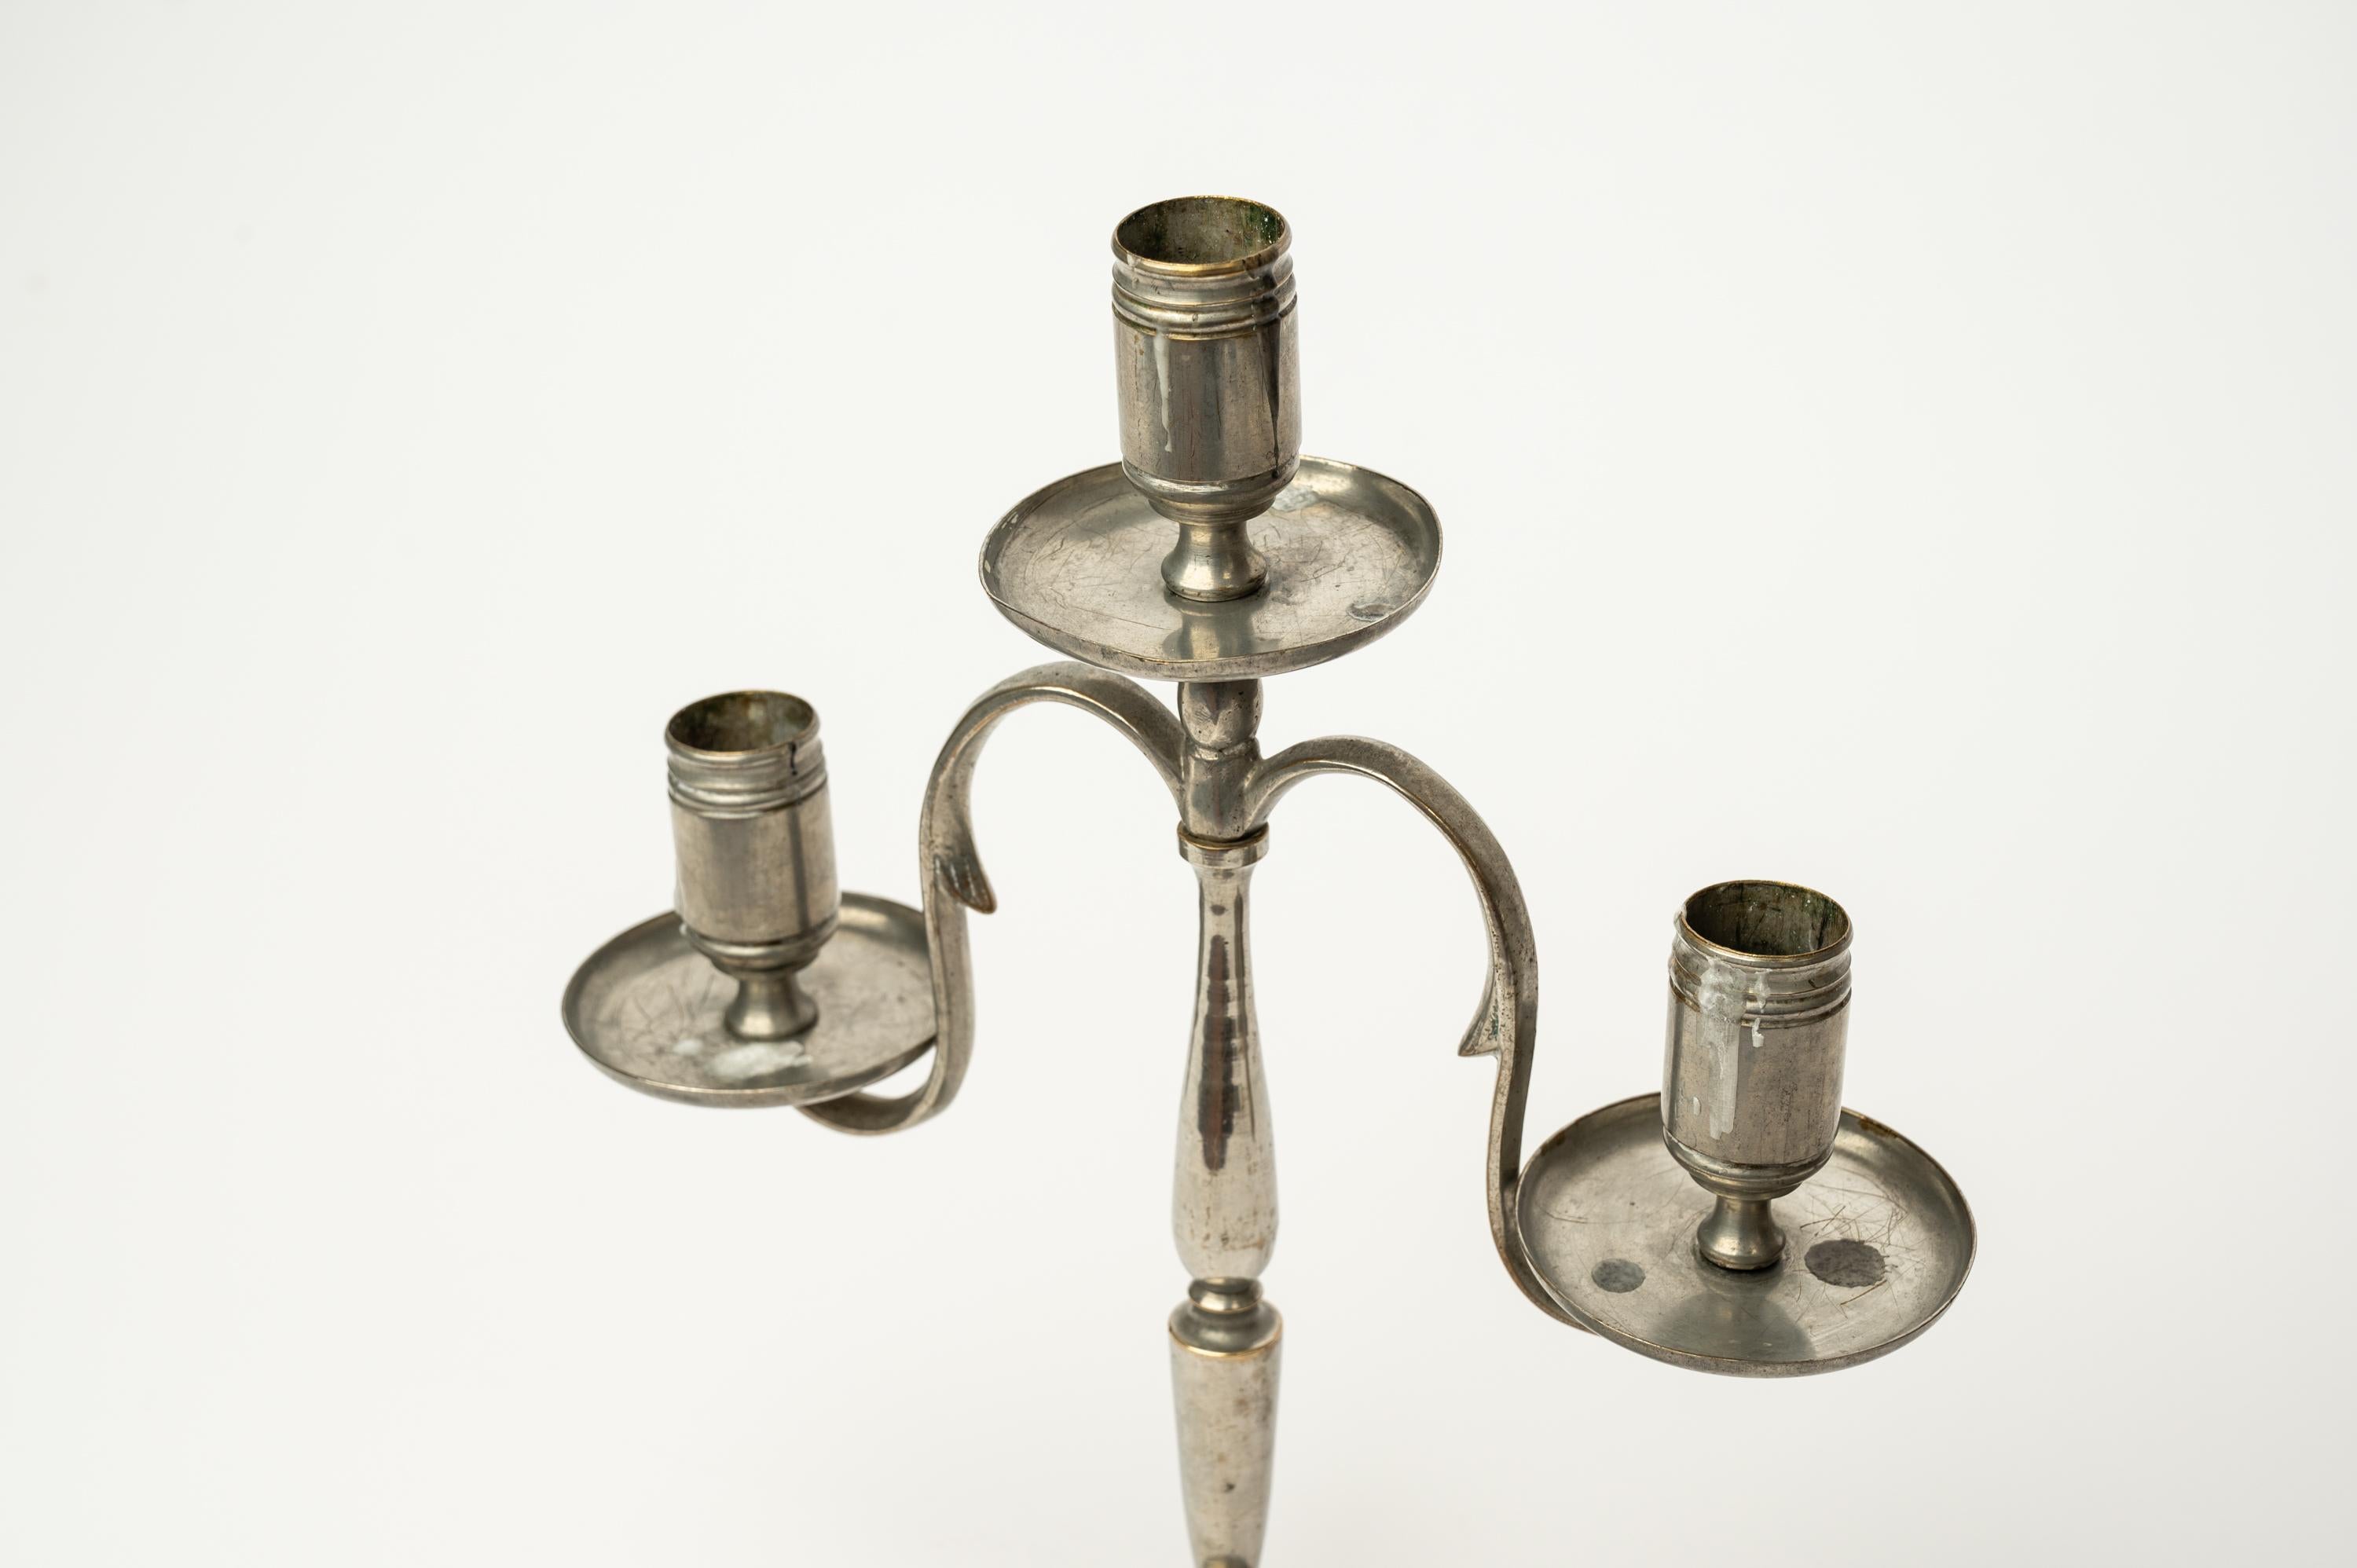 This small bronze candelabra is a classic design by Finnish architect and designer Paavo Tynell. It was made in Finland by Taito Oy in the 1920s or 1930s.

Tynell's candeholders are often decorated with simple geometric patterns or stylized flowers.